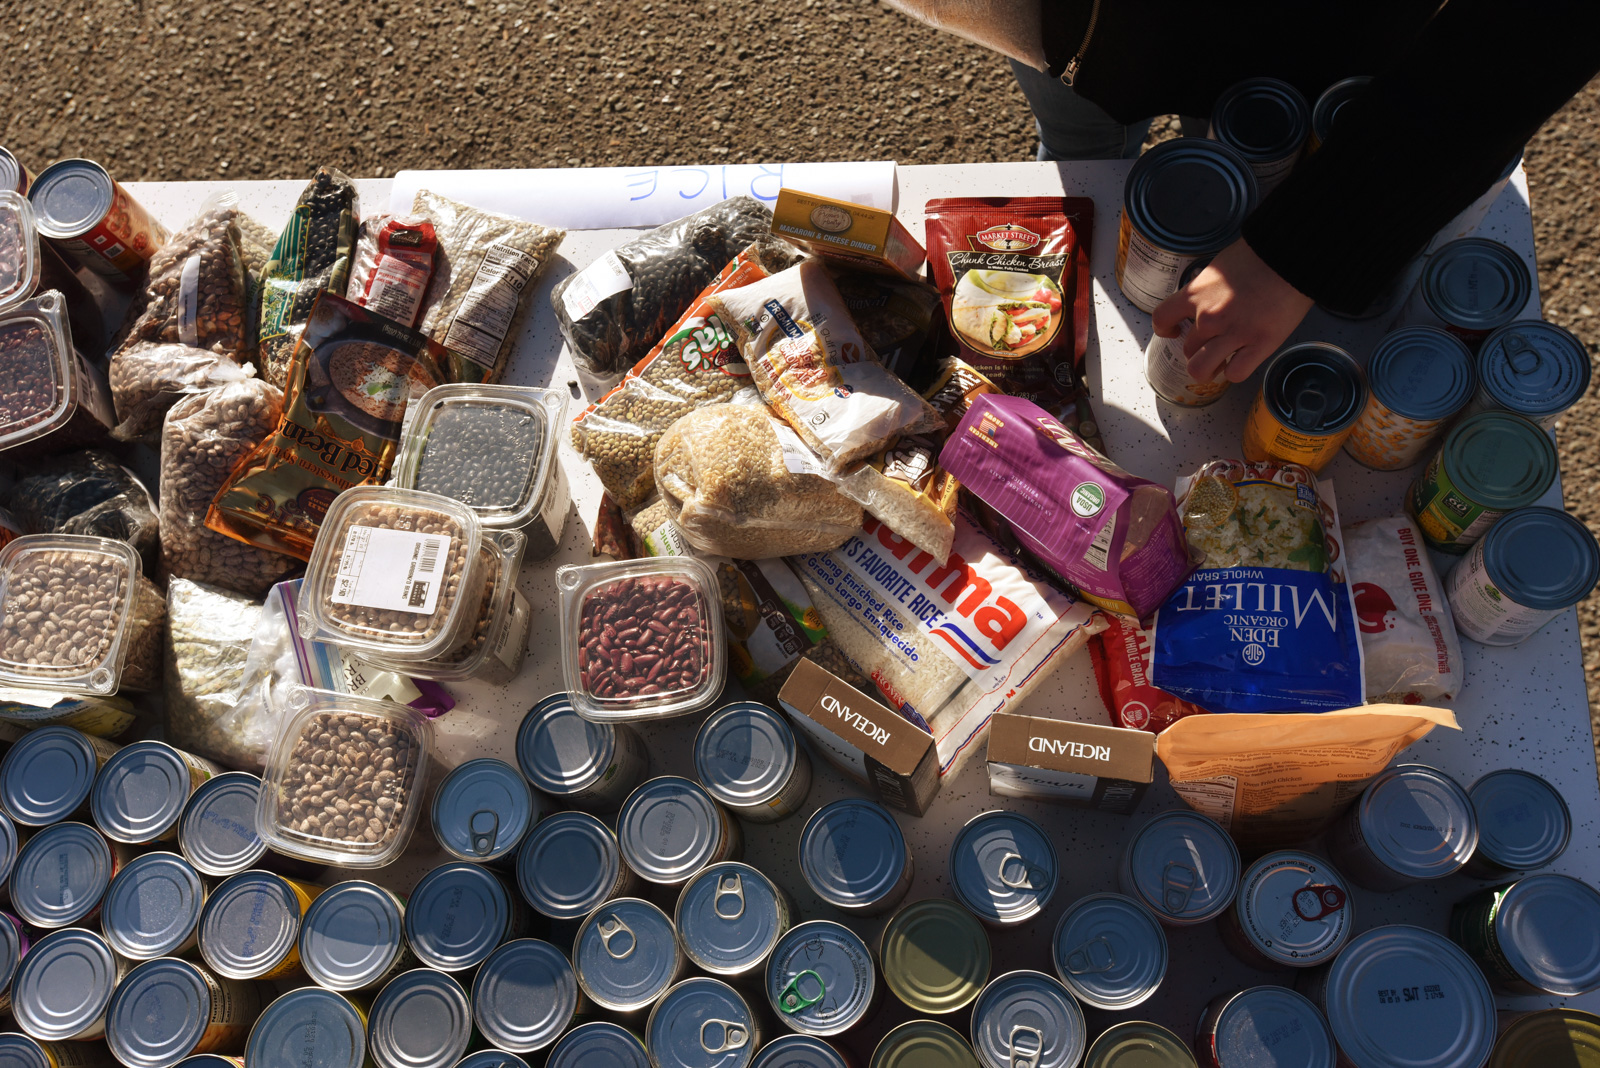 A table displaying bags of rice and beans, canned foods, and other items donated for distribution.